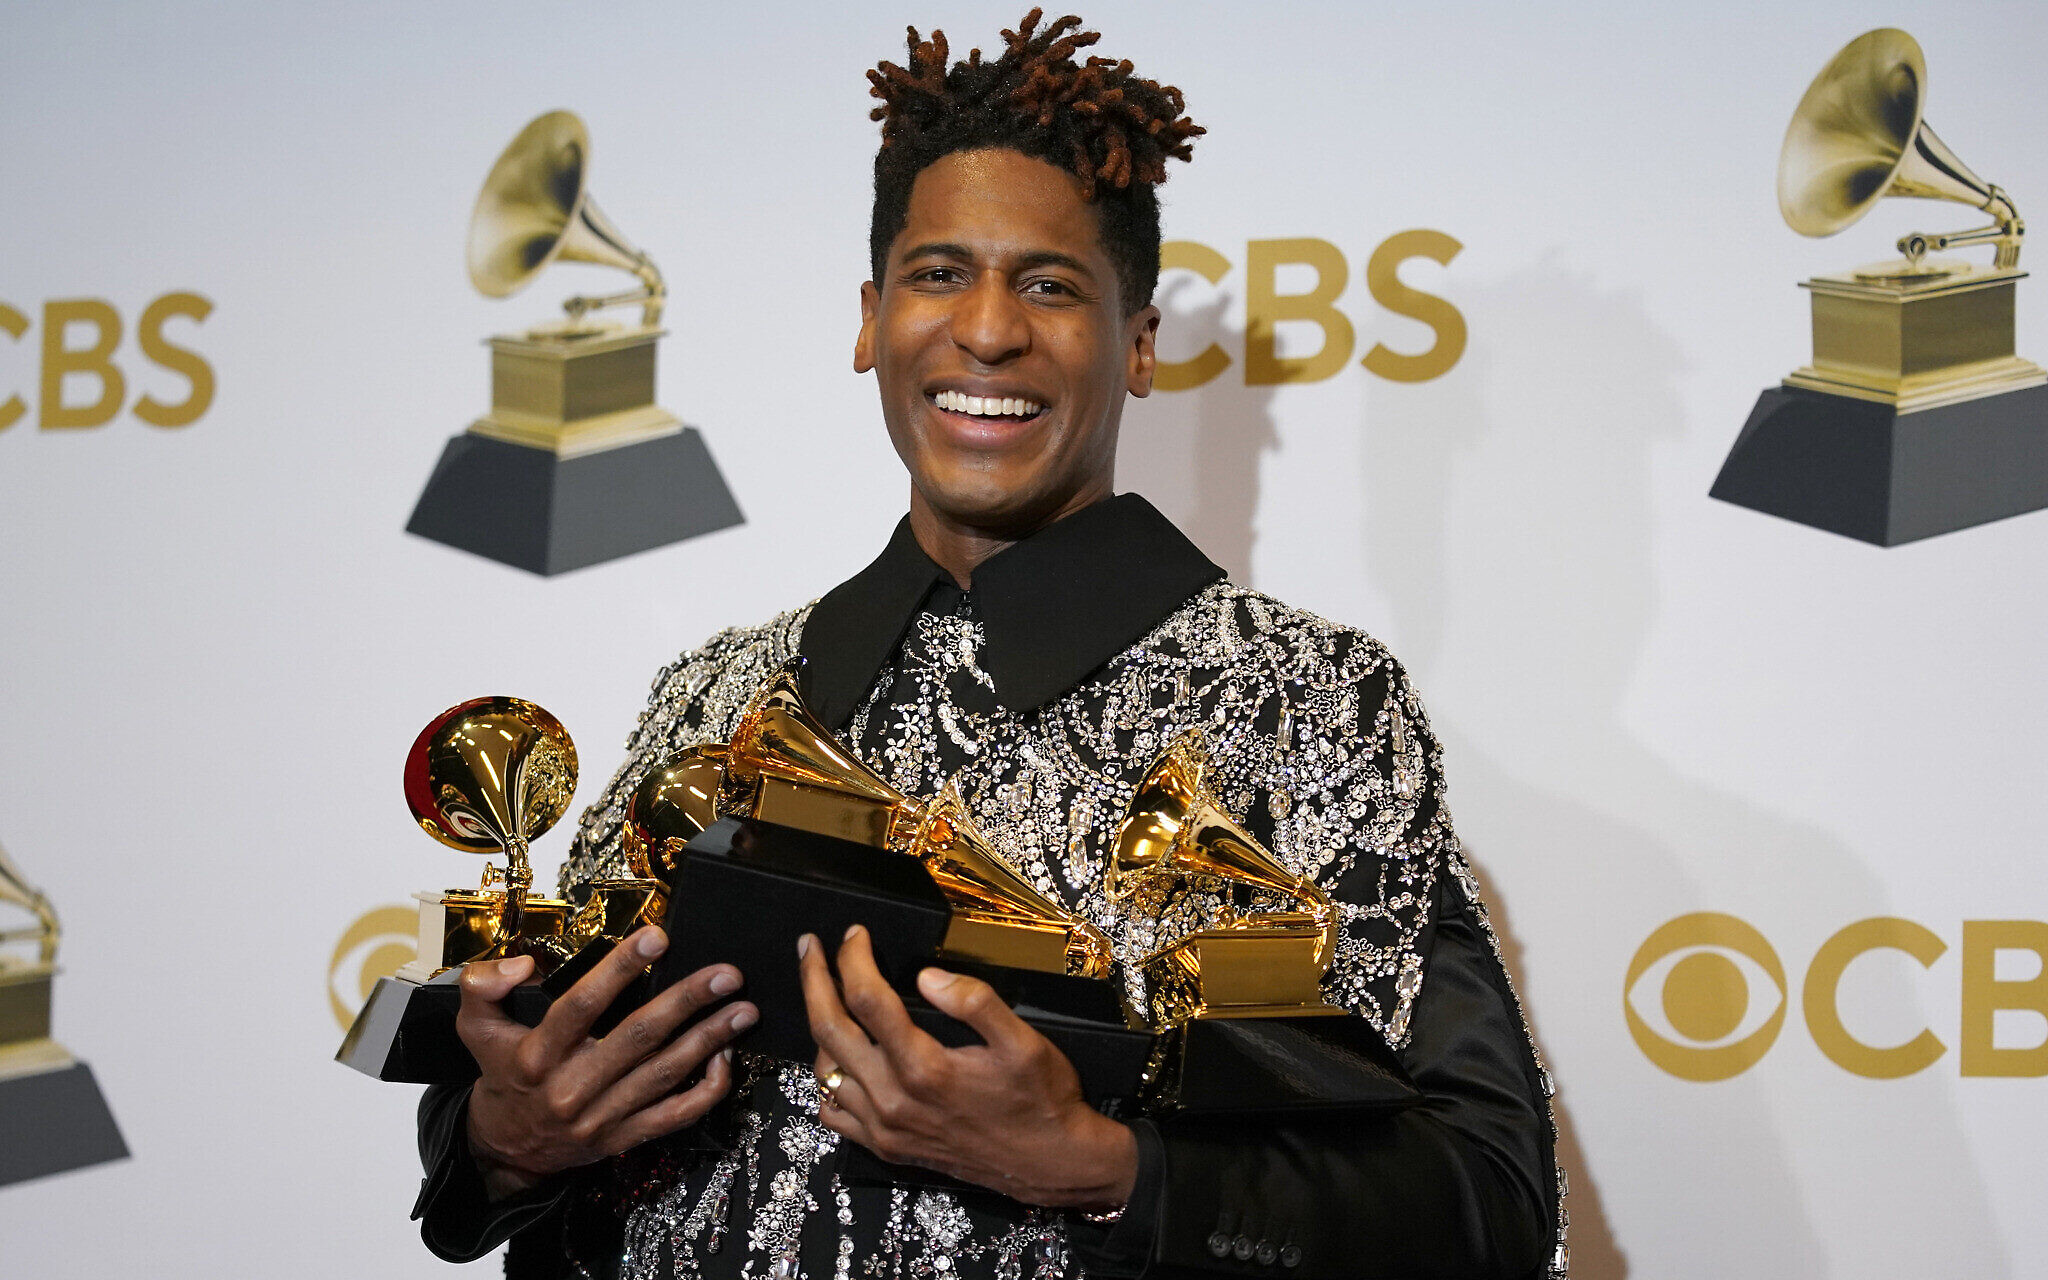 Jon Batiste Religion: Is He Jewish? His Nationality, Family Background, And Political Party He Support